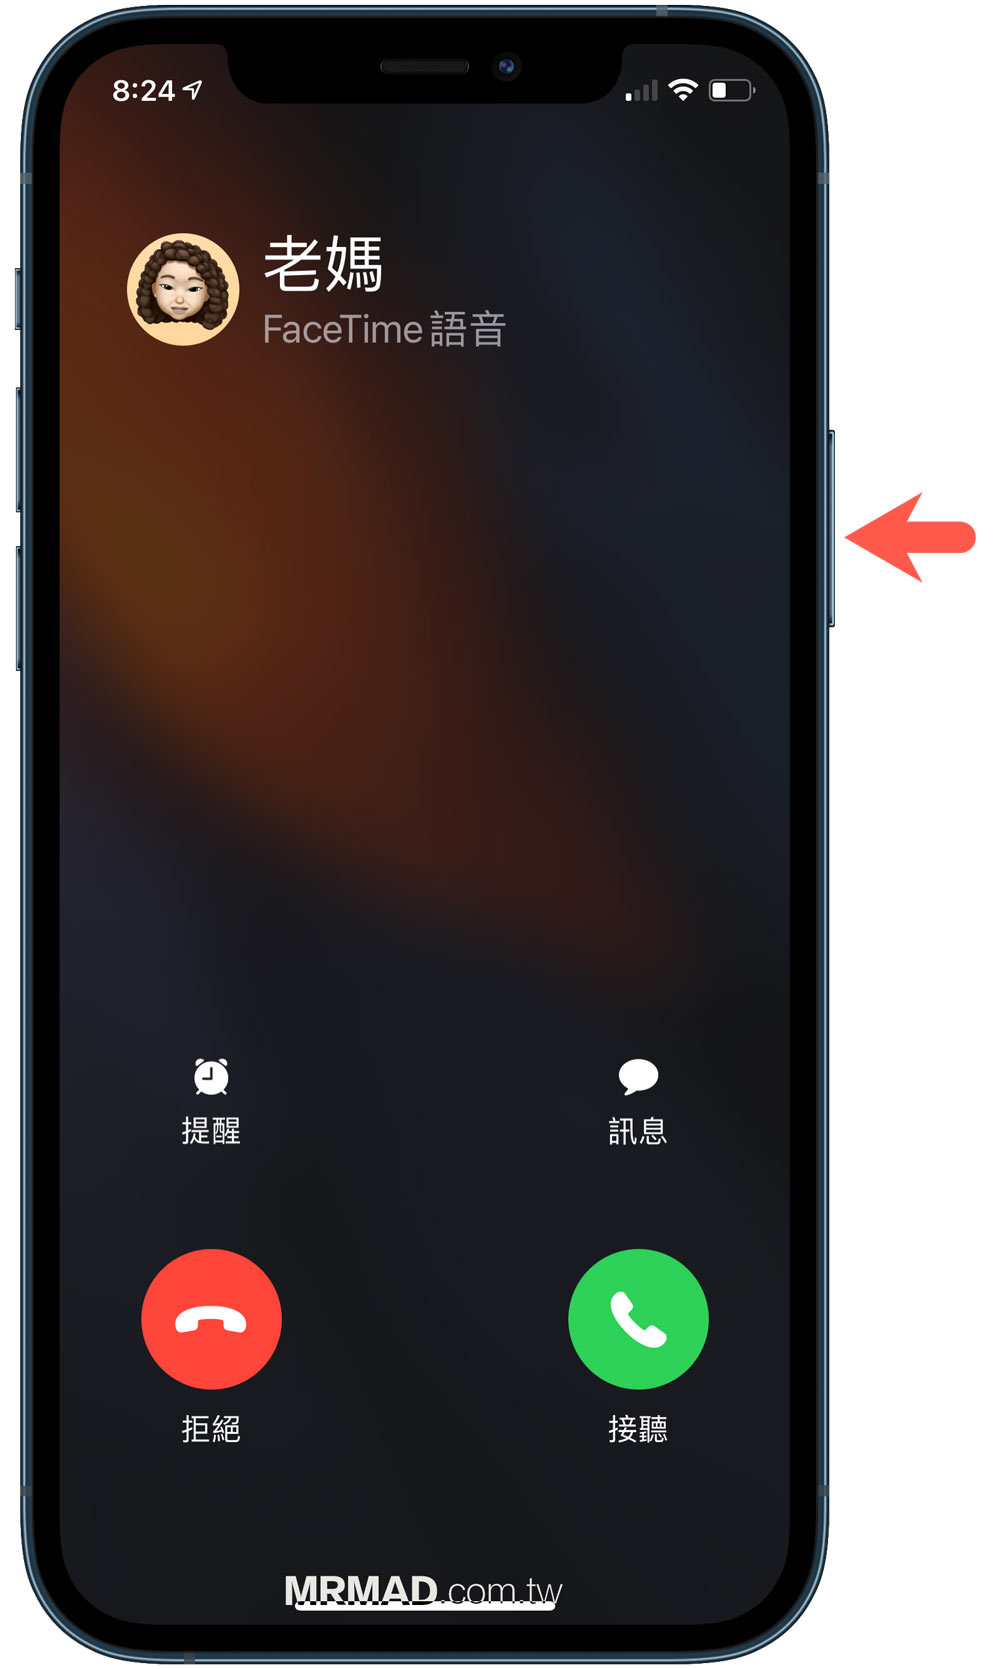 Trick 7. Mute and hang up iPhone calls